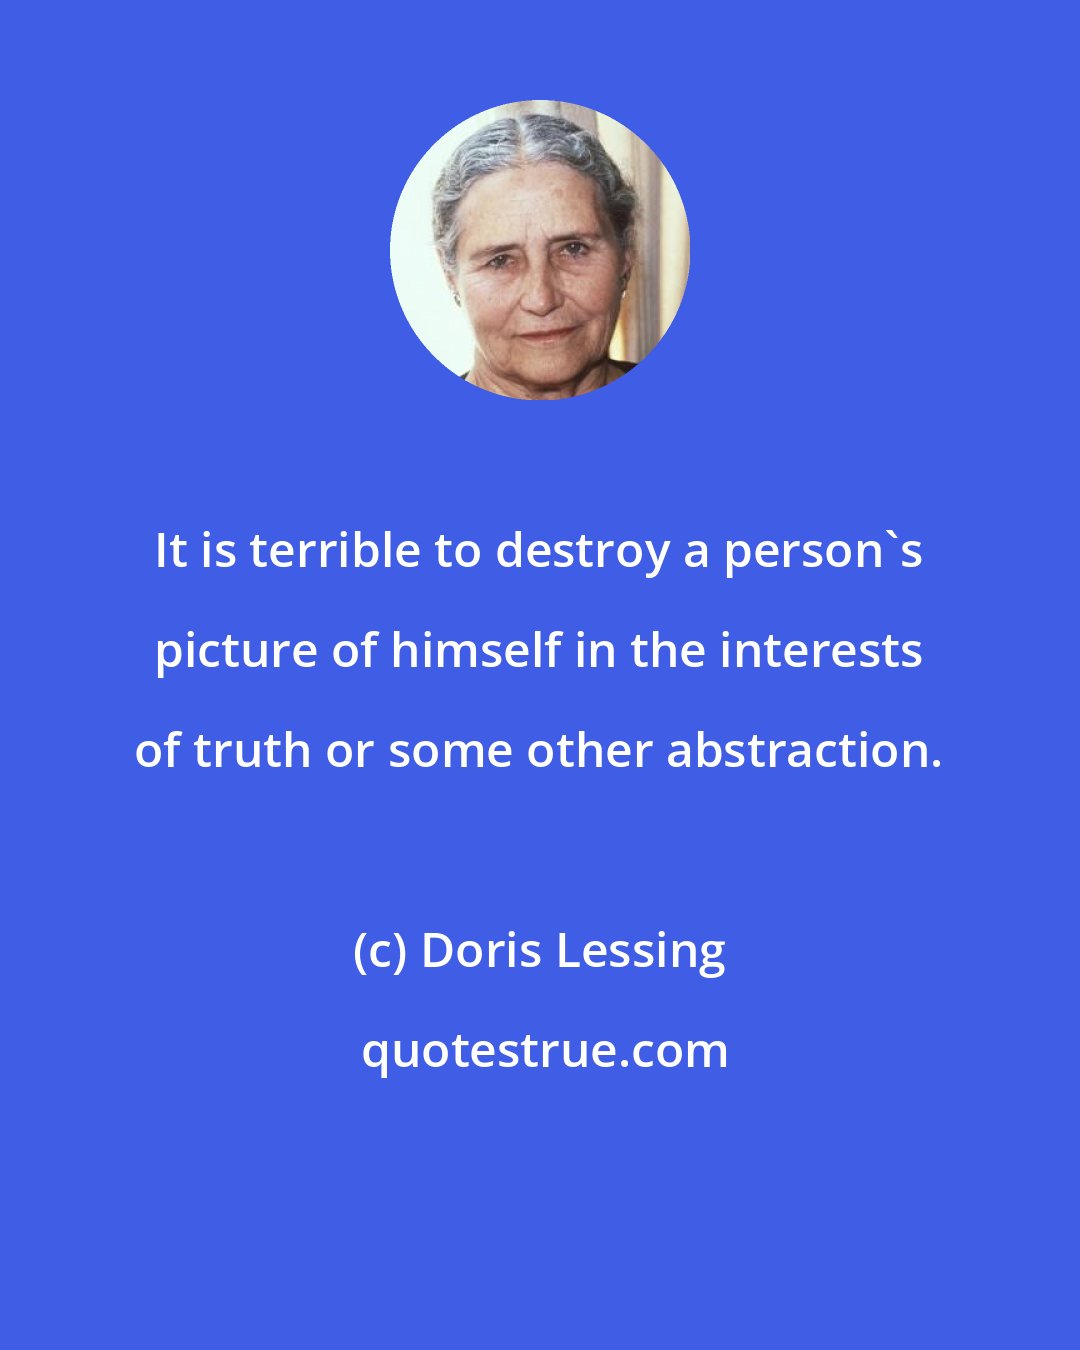 Doris Lessing: It is terrible to destroy a person's picture of himself in the interests of truth or some other abstraction.